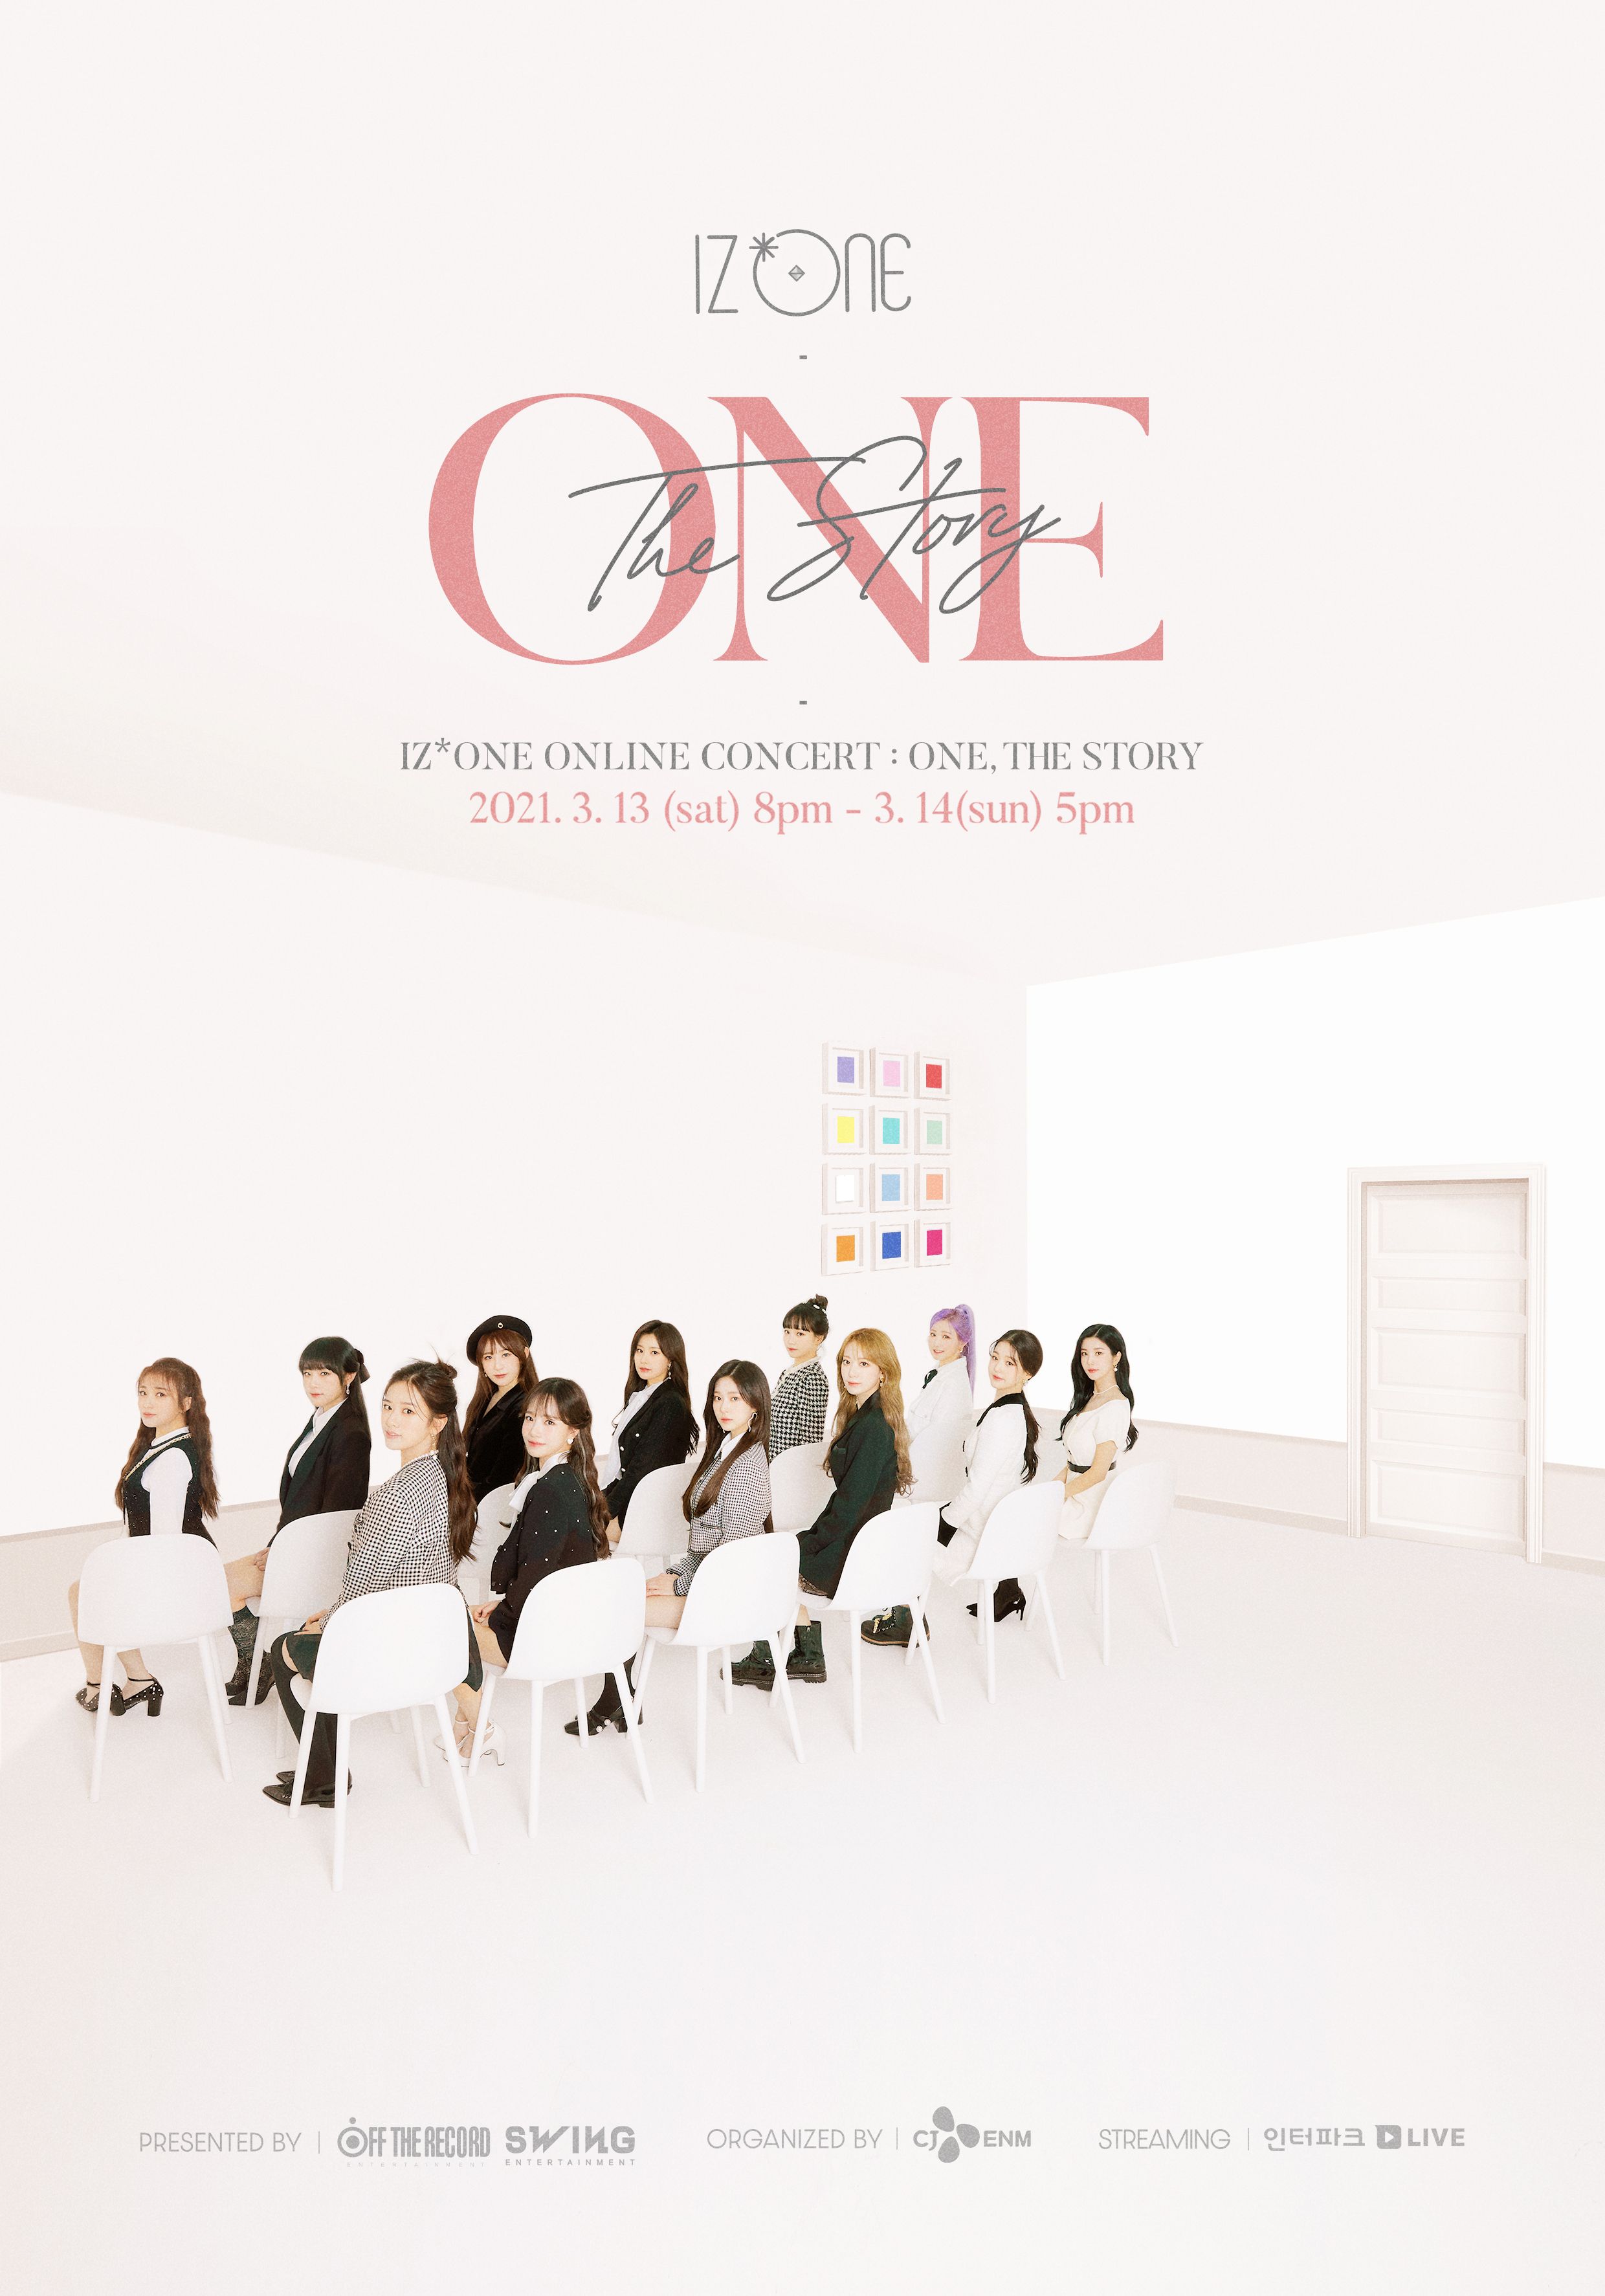 IZ*ONE ONLINE CONCERT: ONE, THE STORY